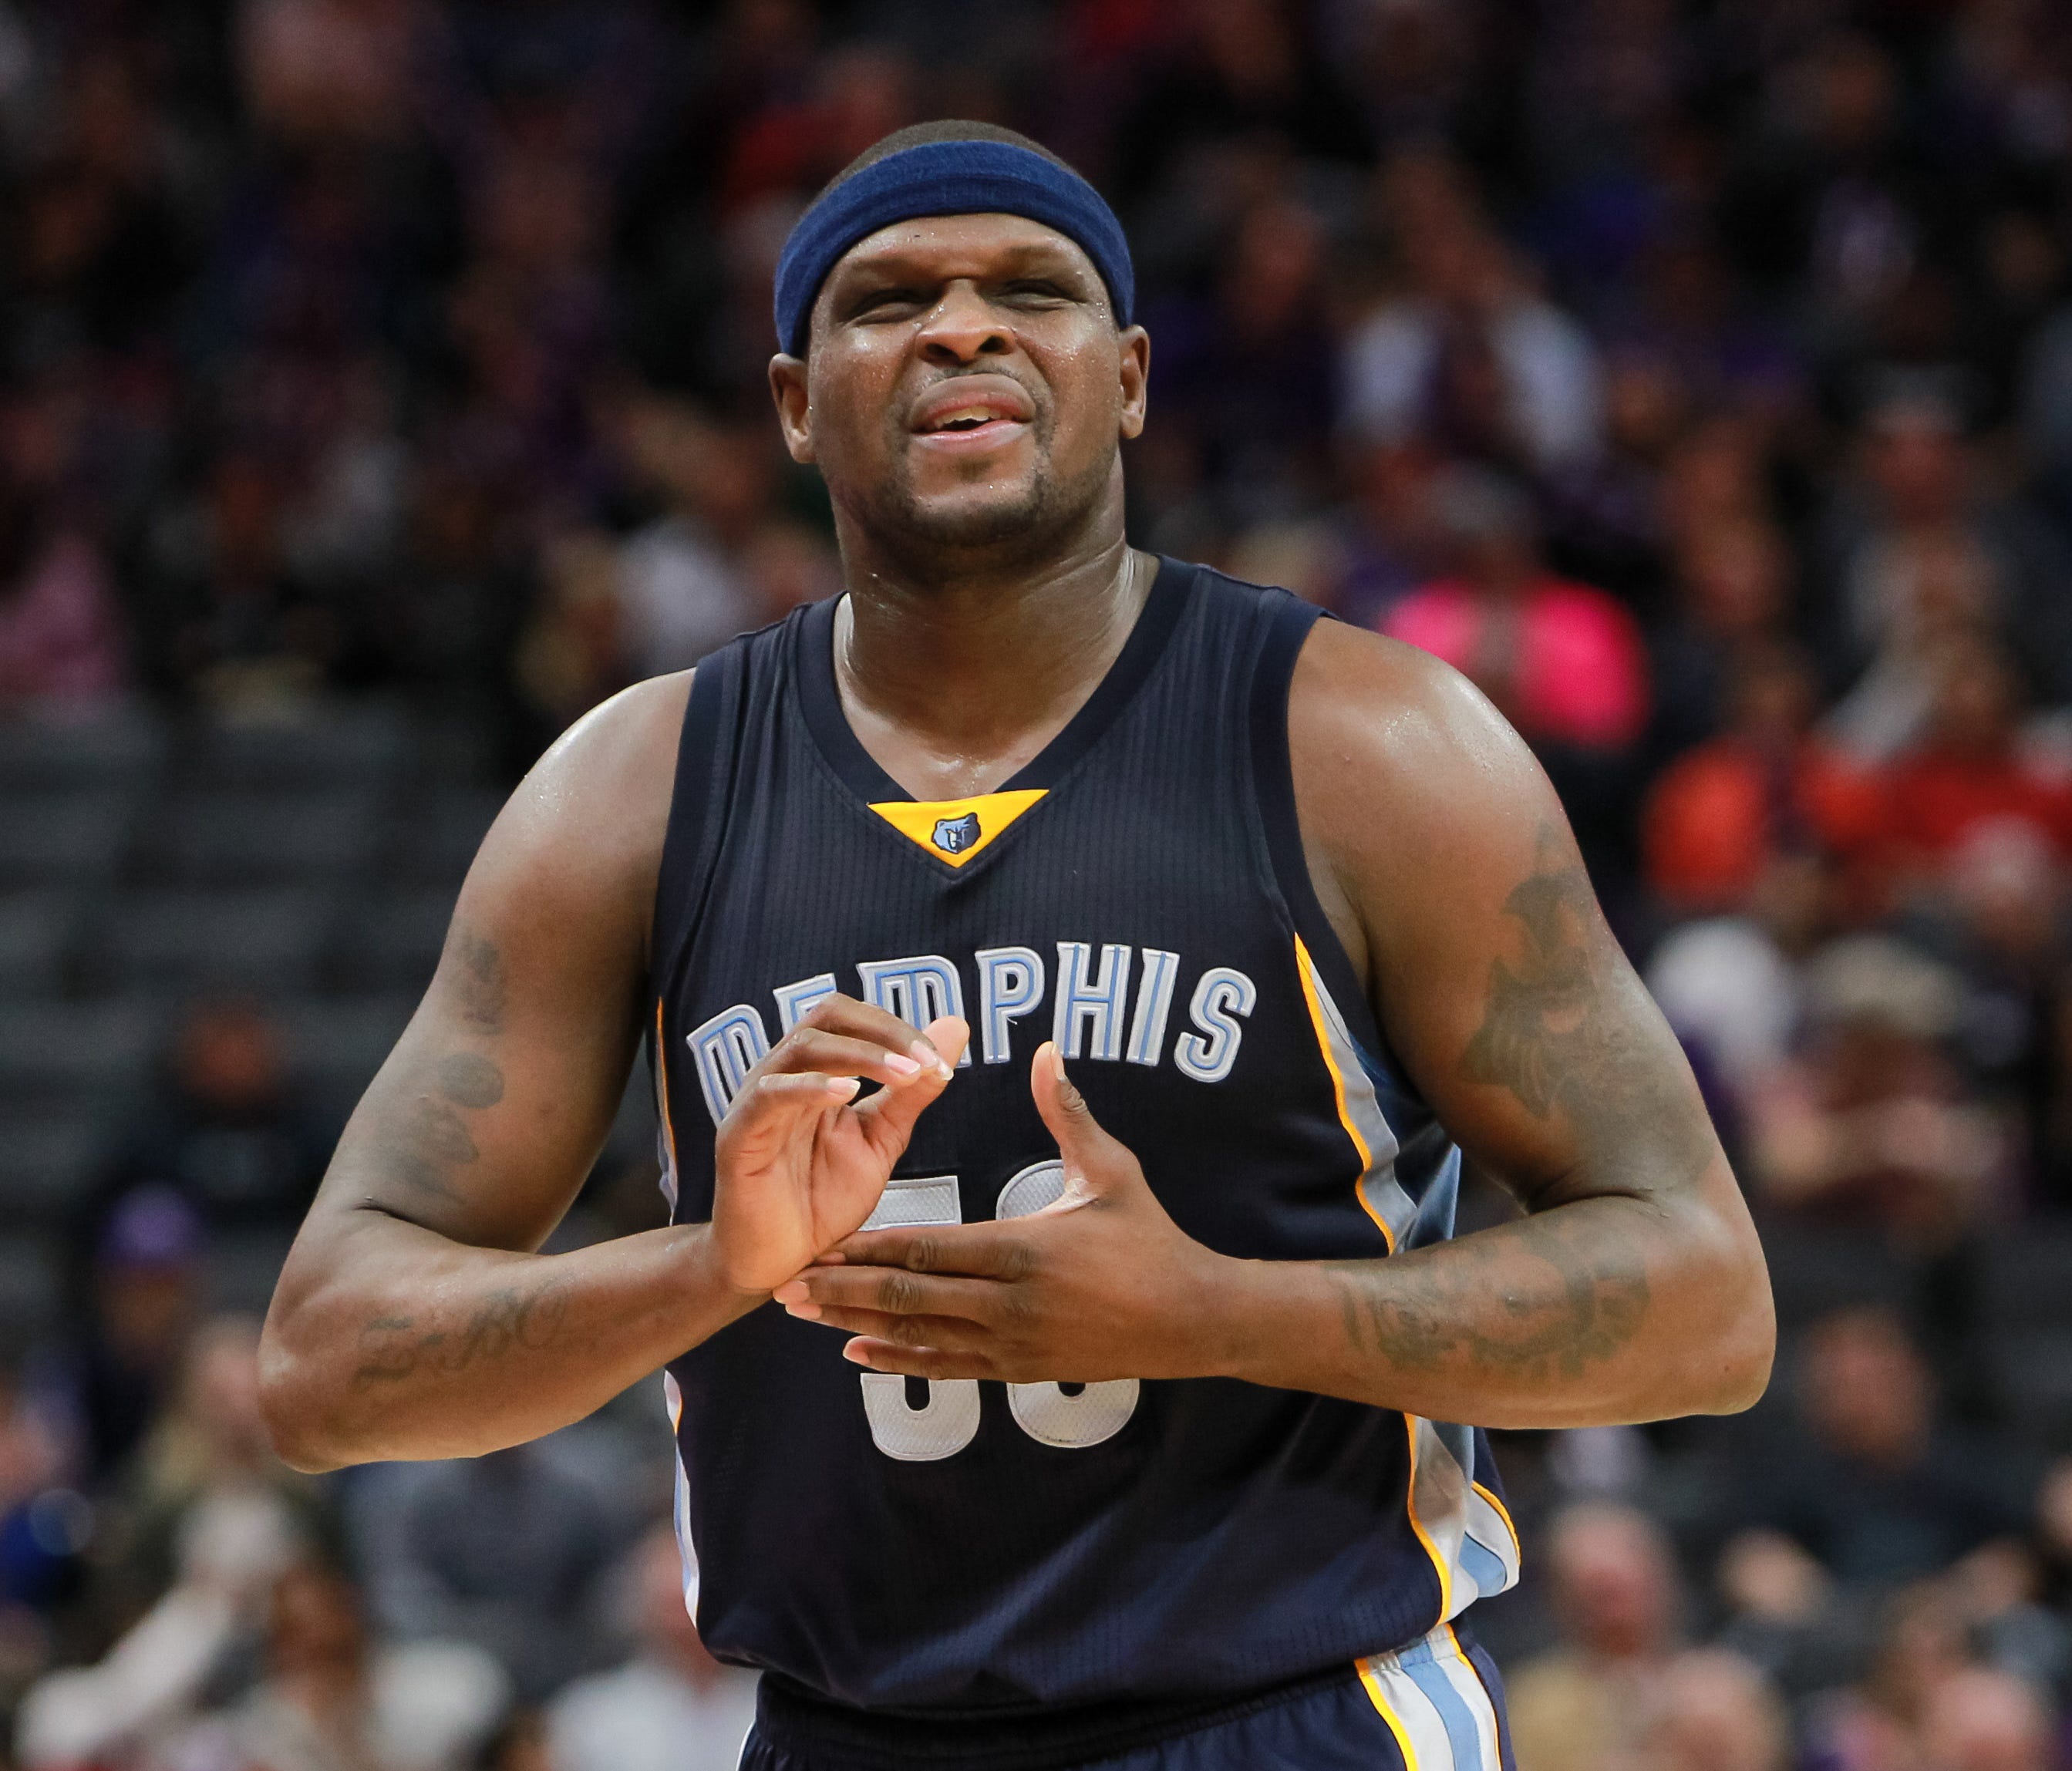 Kings forward Zach Randolph was arrested late Wednesday in L.A.